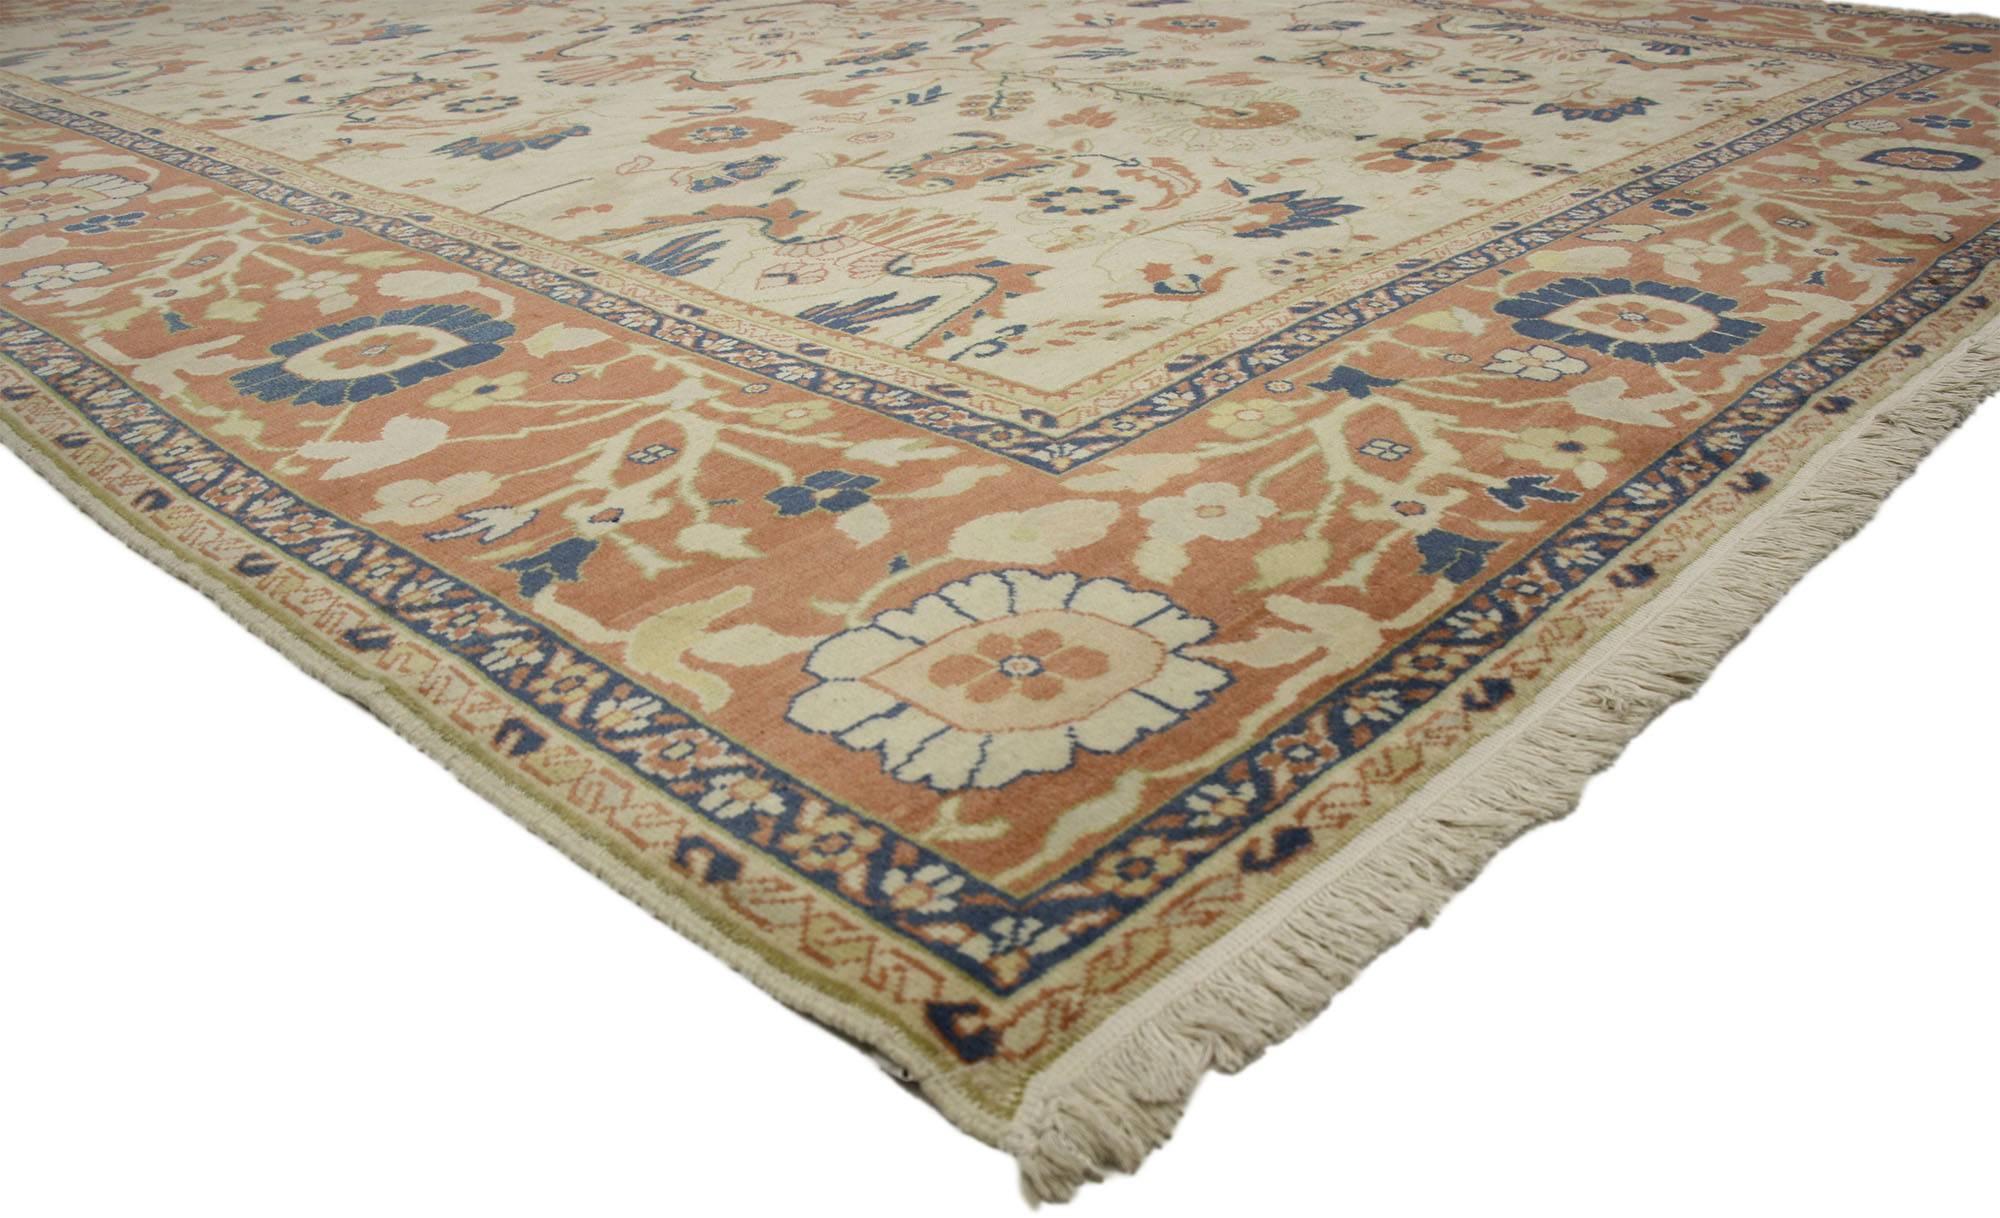 77114 Vintage Persian Mahal Rug with Rustic Italian Country Cottage Style 09'08 x 13'05. With warm terracotta hues and pops of royal blue inspired by Italy, this hand knotted wool vintage Persian Mahal rug beautifully embodies an Italian Country